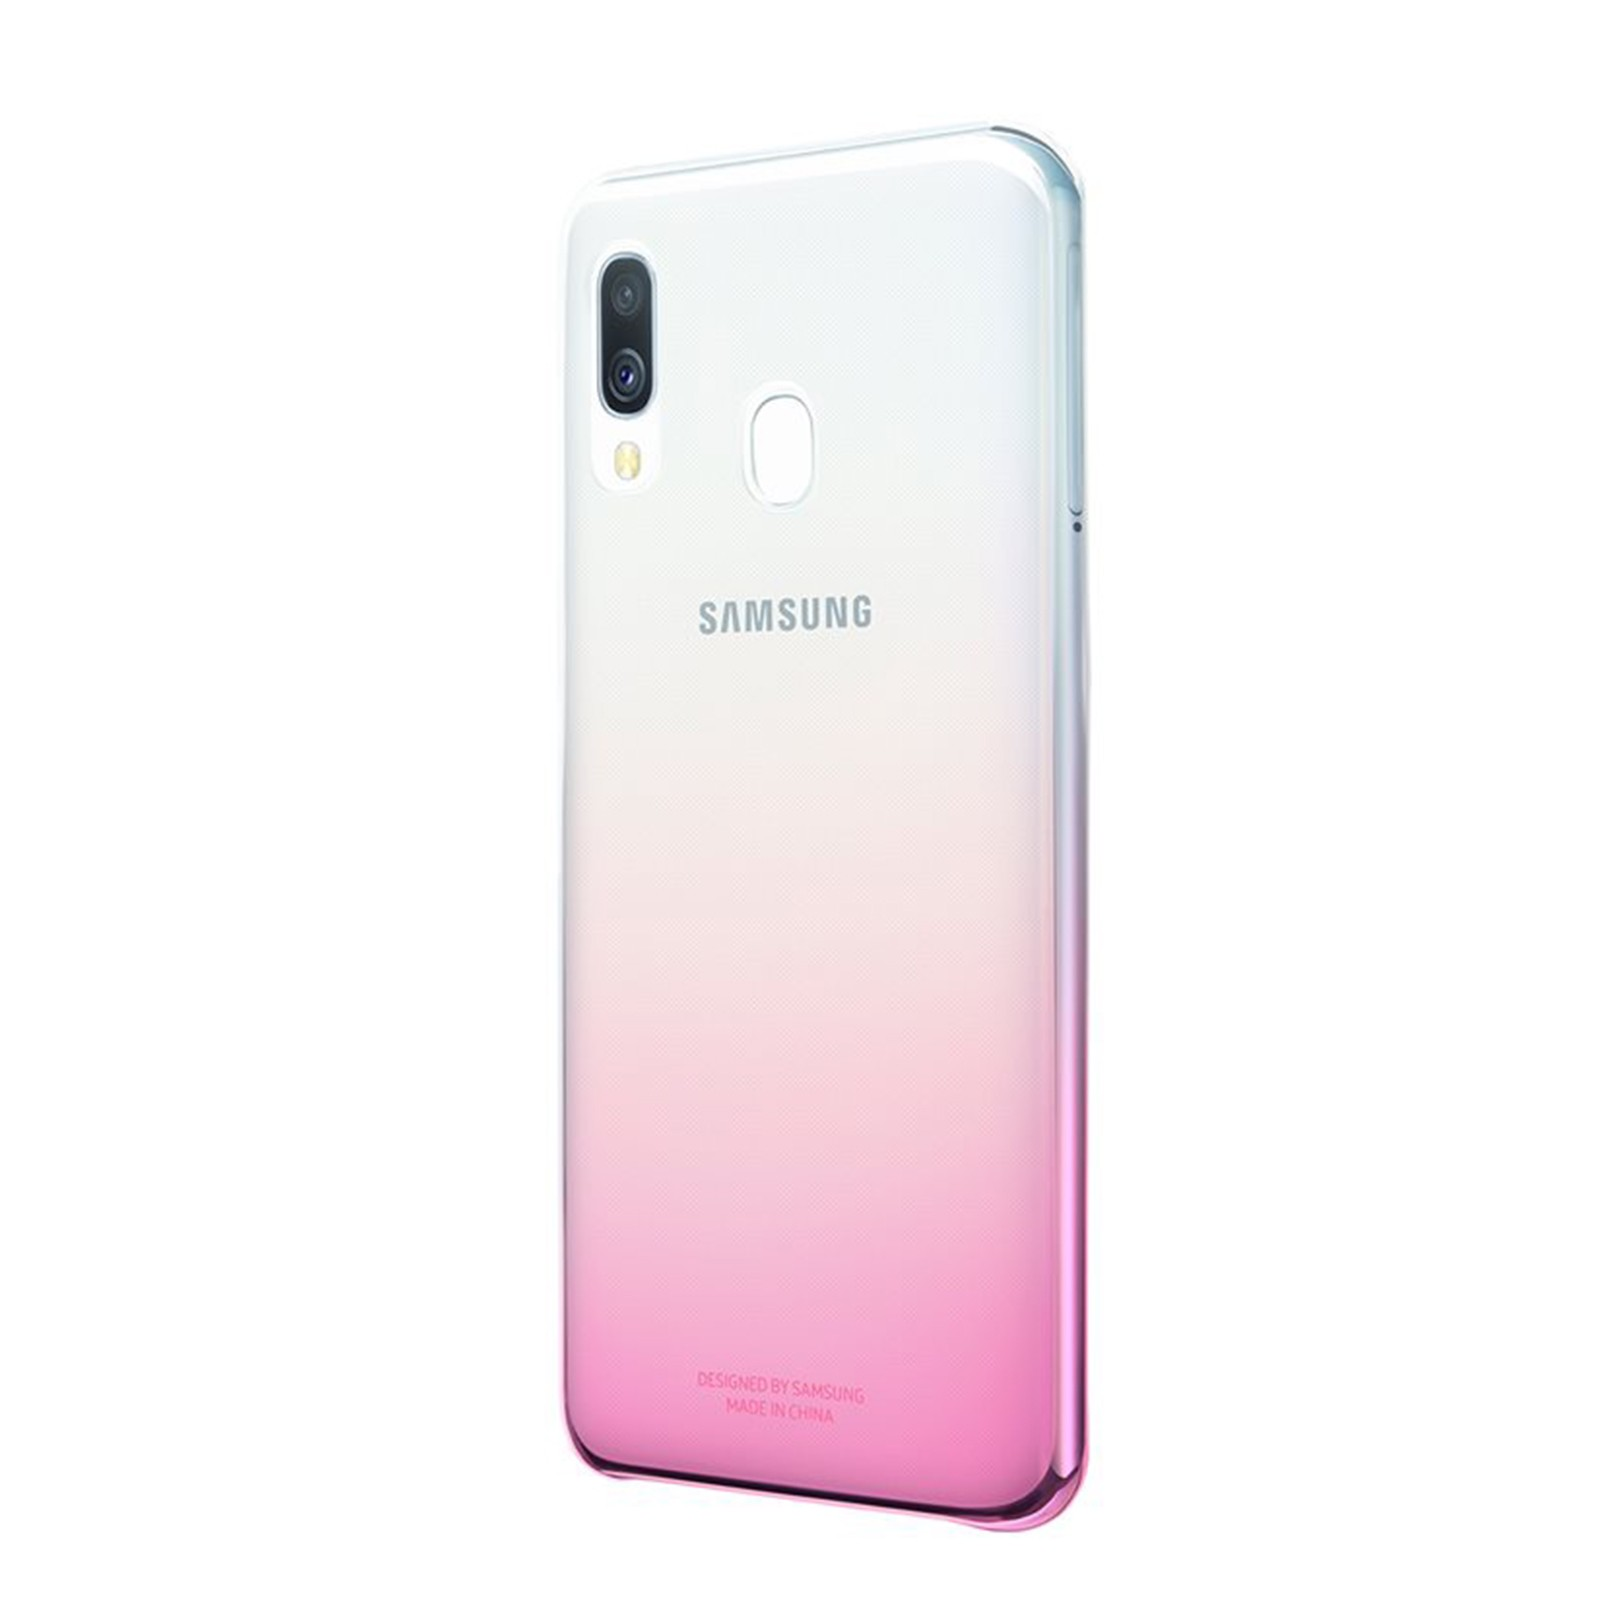 COVER PINK, Galaxy GAL. SAMSUNG Samsung, A40, A40 Backcover, GRADATION EF-AA405CPEGWW Pink